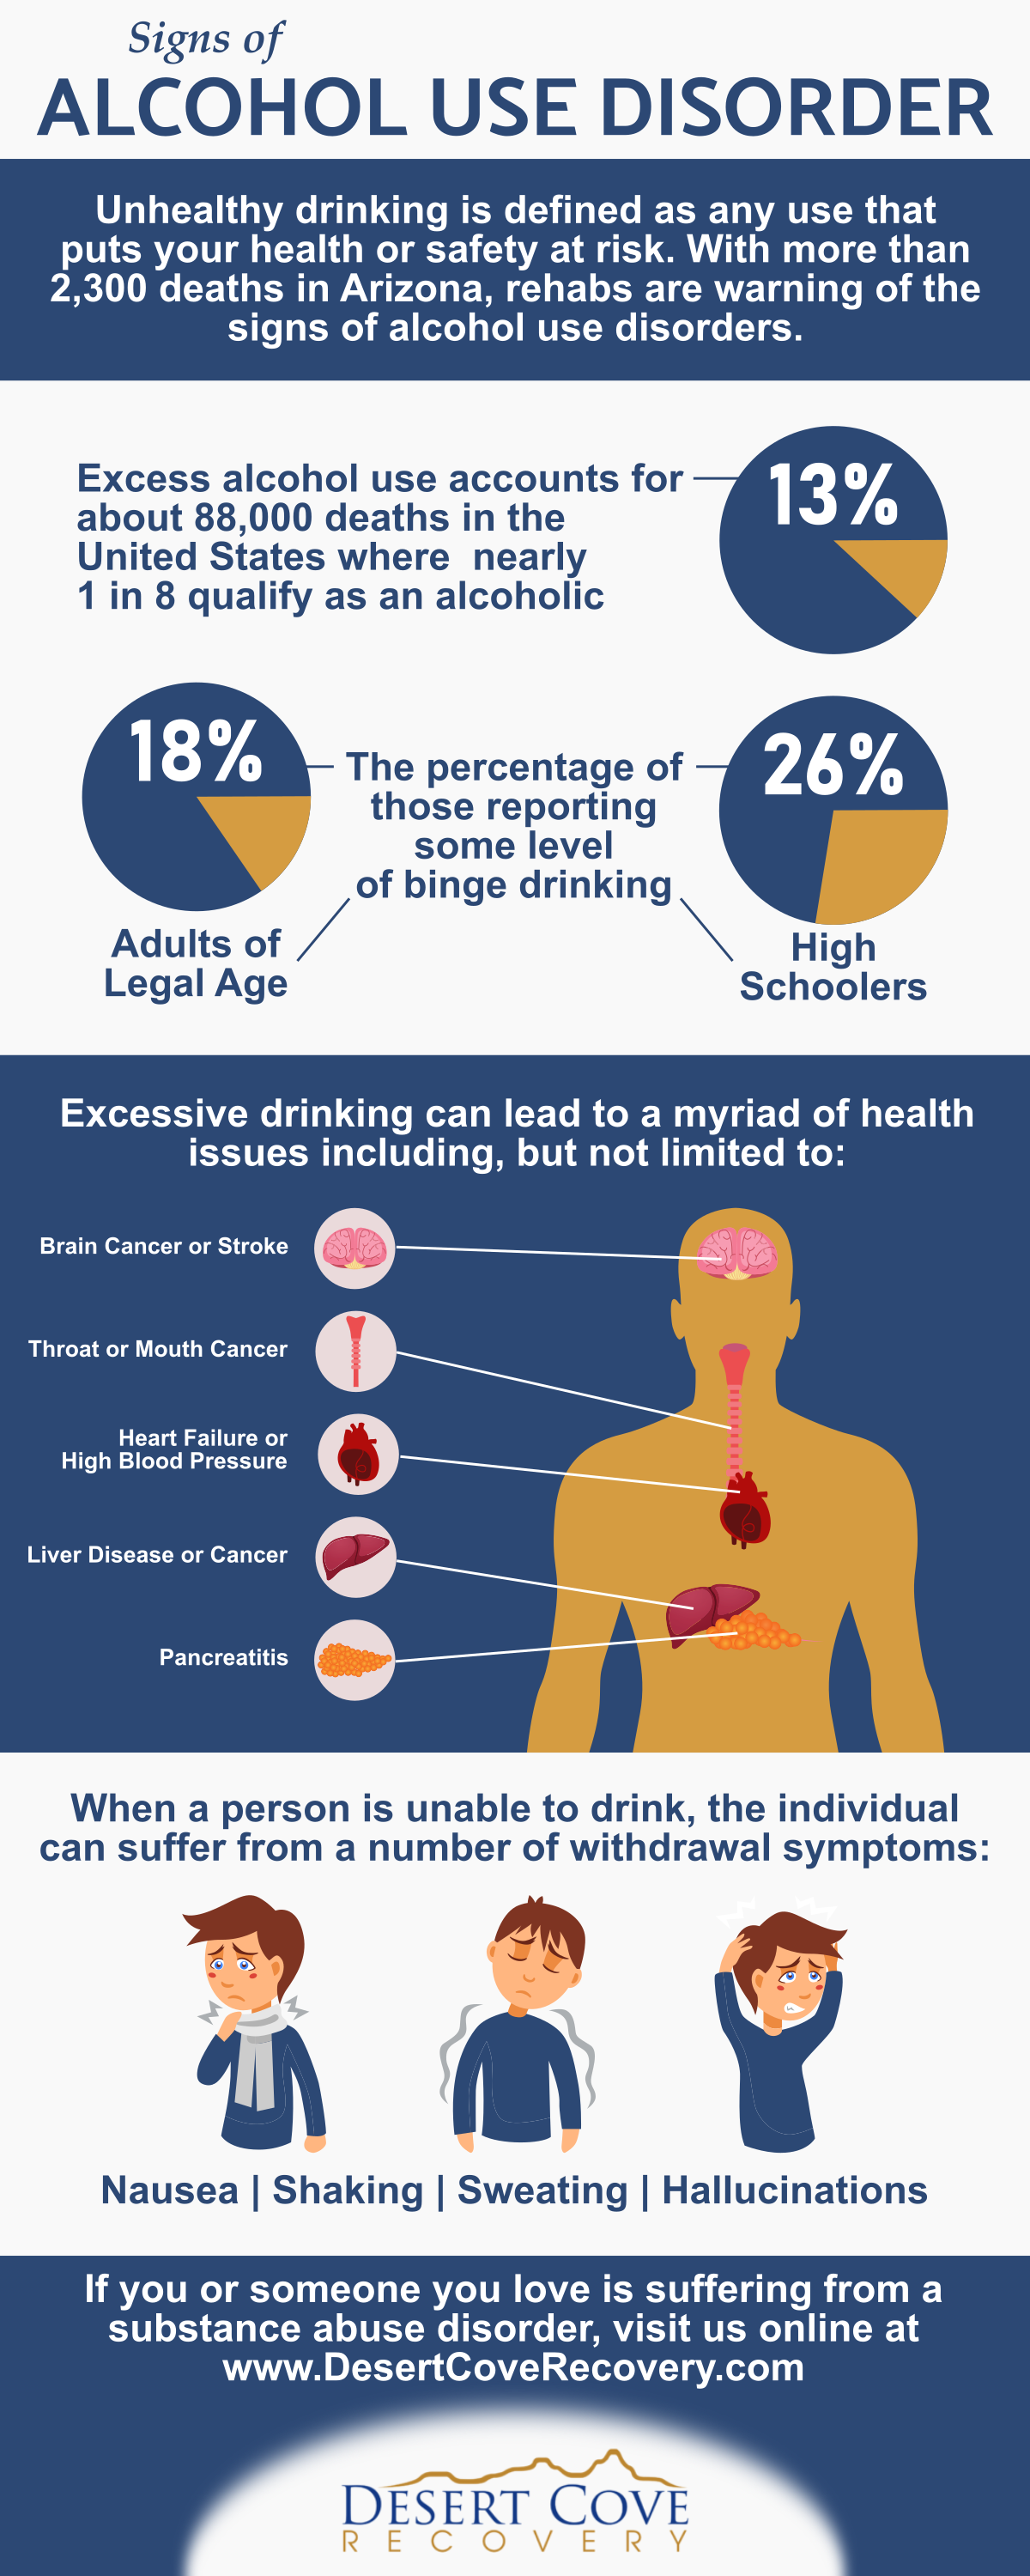 Alcohol Rehab Arizona Warns About the Signs of Alcohol Use Disorder